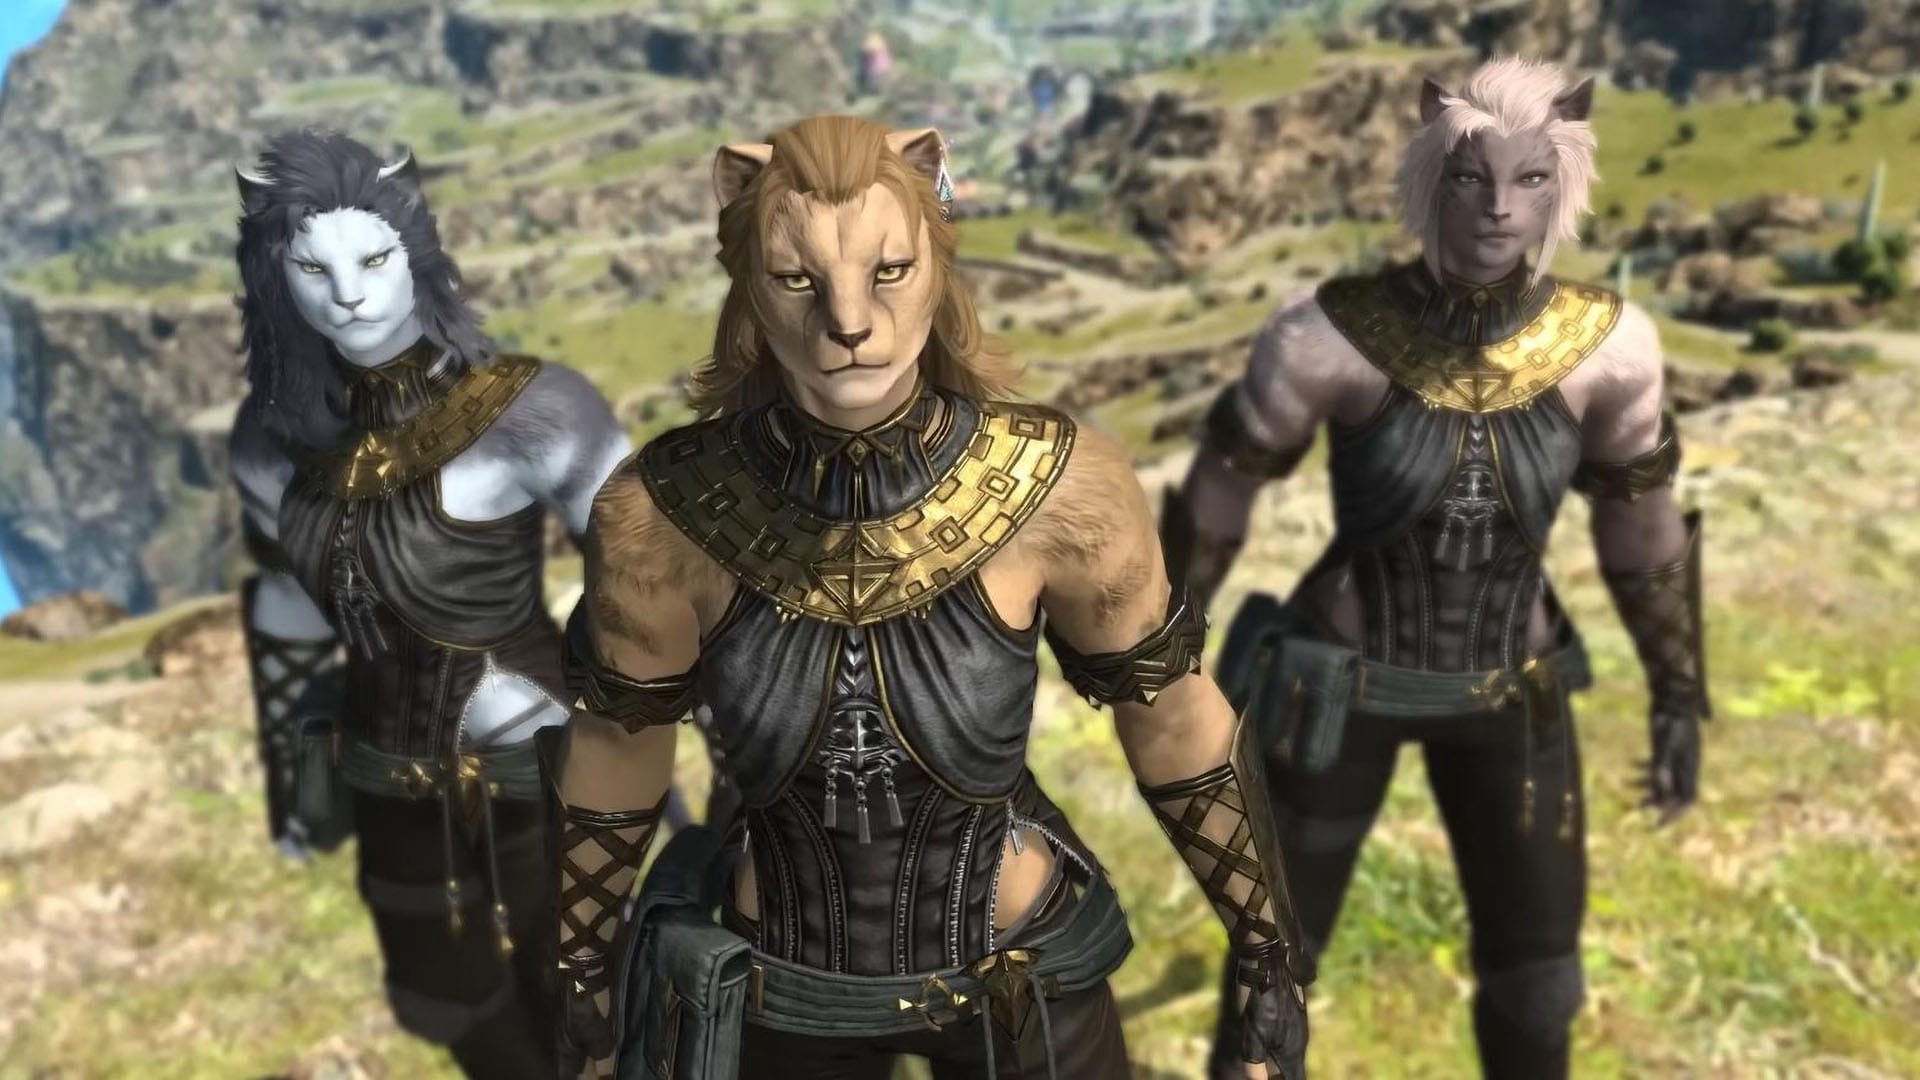 Final Fantasy XIV Reveals Dawntrail Footage and Details: Female Hrothgar, Locations, and Much More